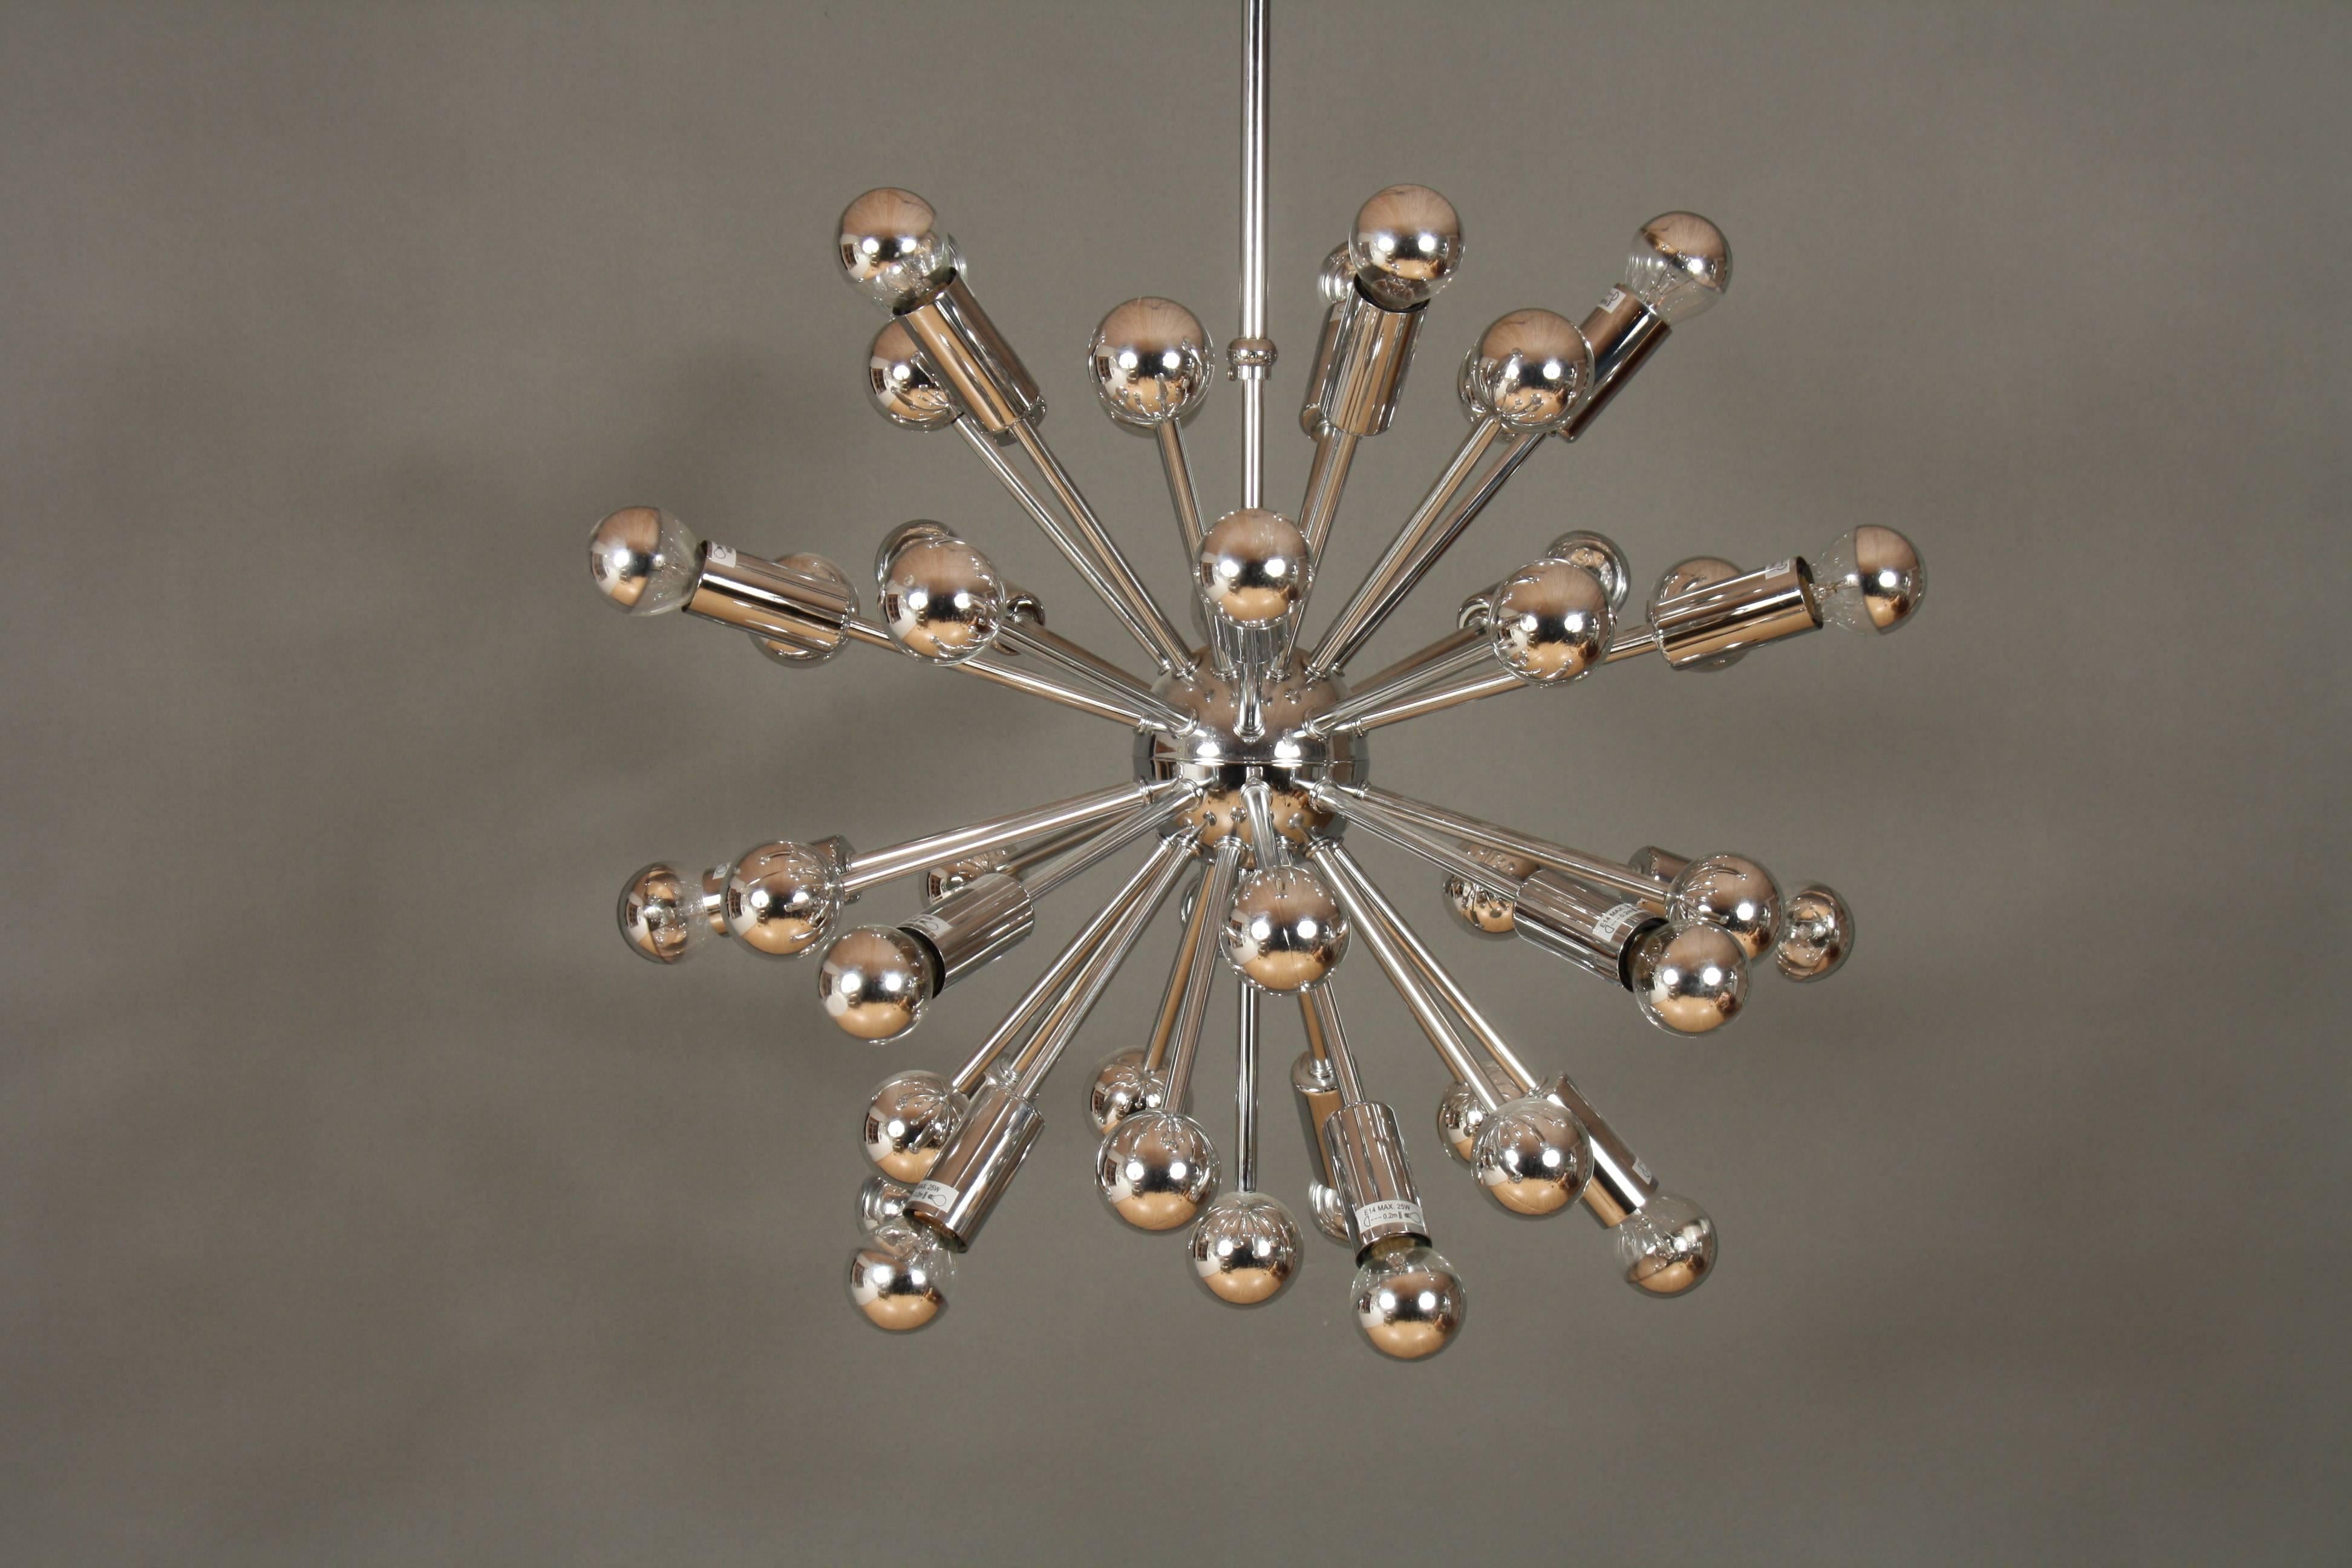 Mid-Century style chrome Sputnik chandelier. Mid-Century Modern style Sputnik chandelier consisting of chrome rods that extends from its chromed steel centre point with 20 chrome balls and 20 light sockets.